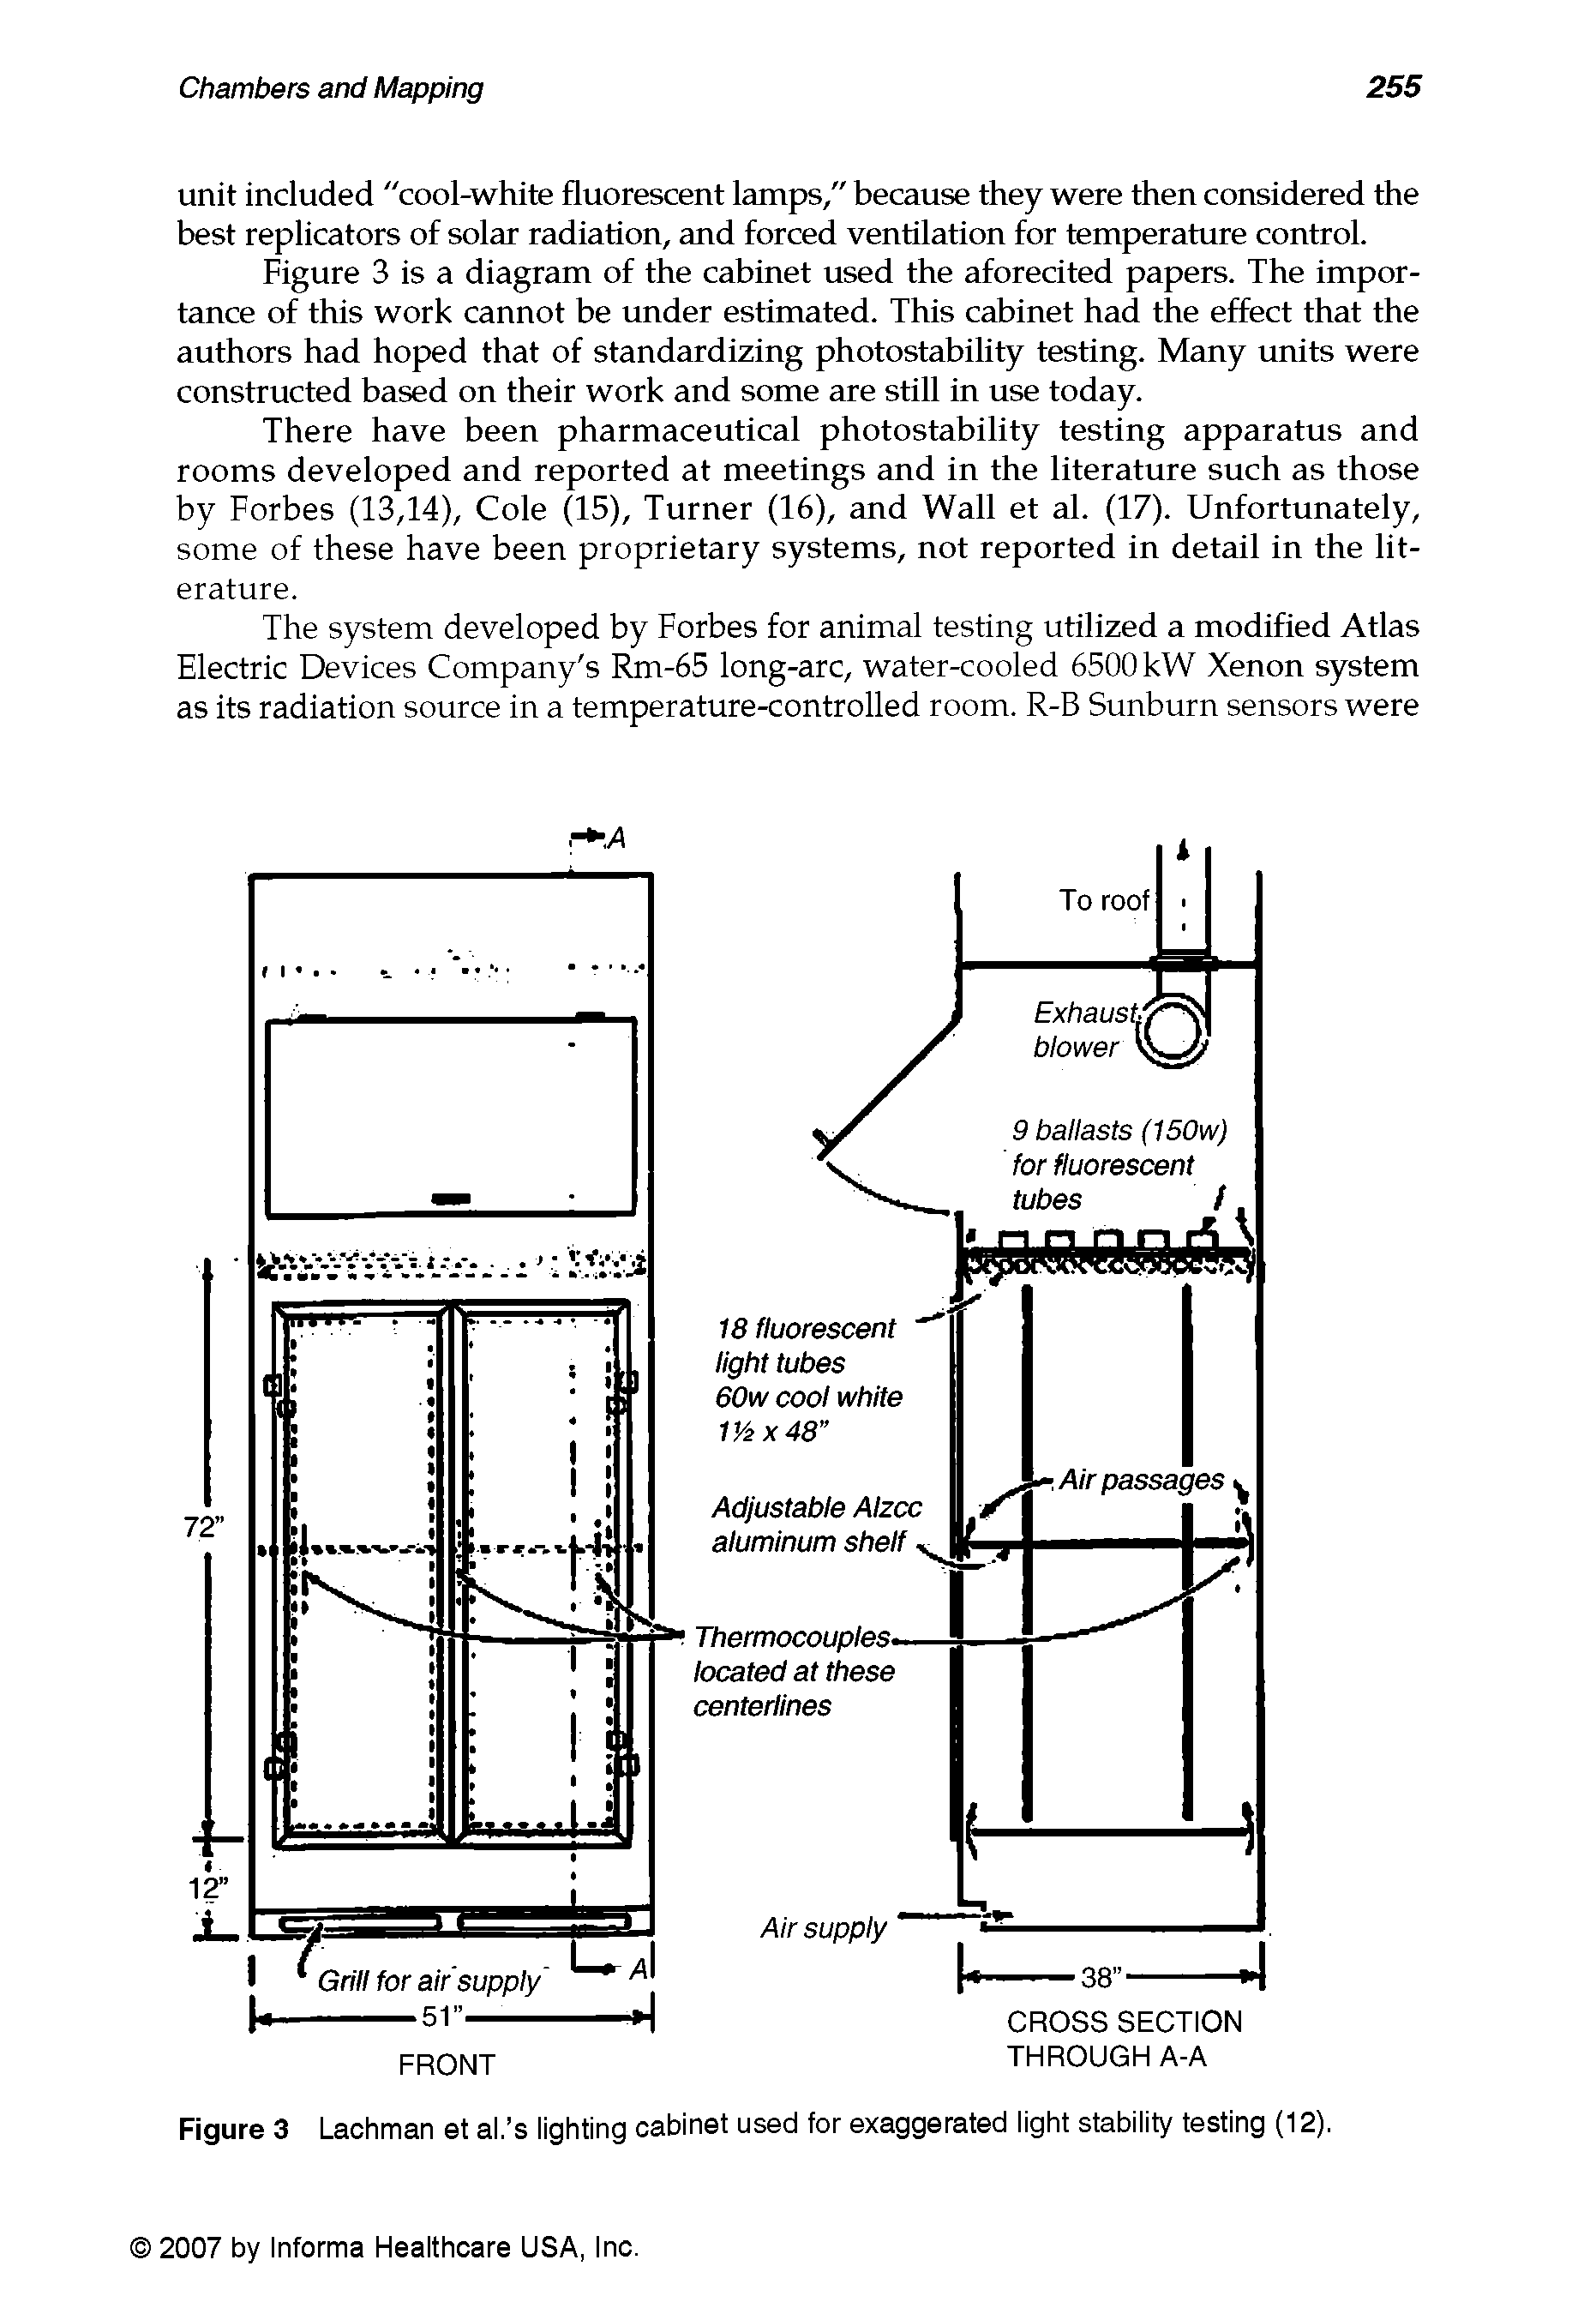 Figure 3 Lachman et al. s lighting cabinet used for exaggerated light stability testing (12).